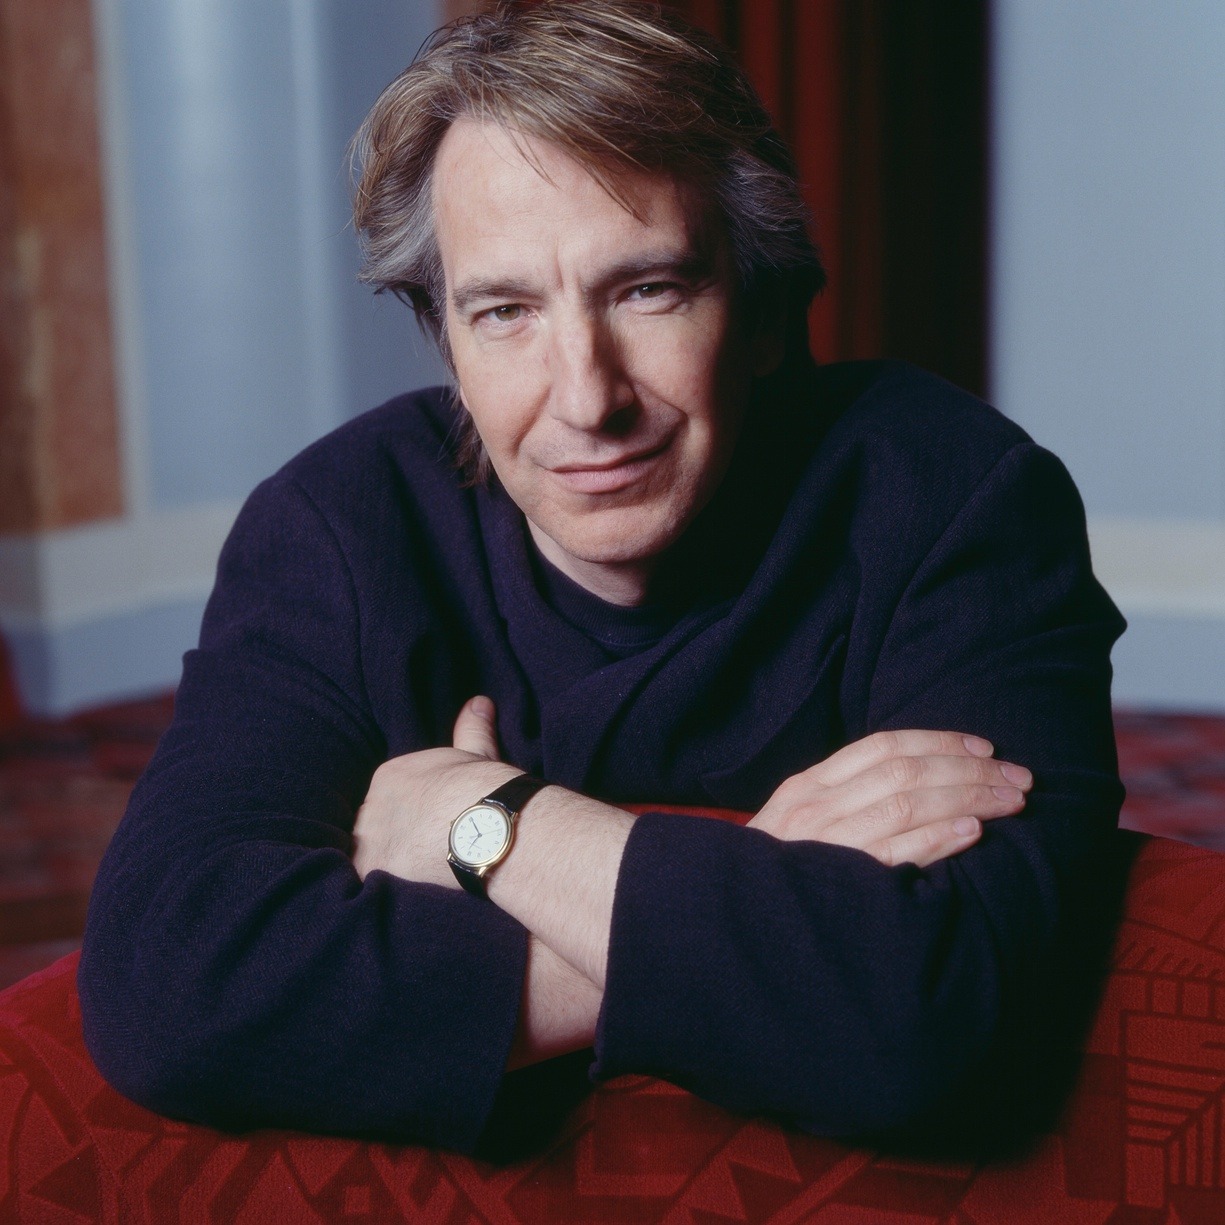 guardian:  Alan Rickman, giant of British film and theatre, dies at 69Much-loved